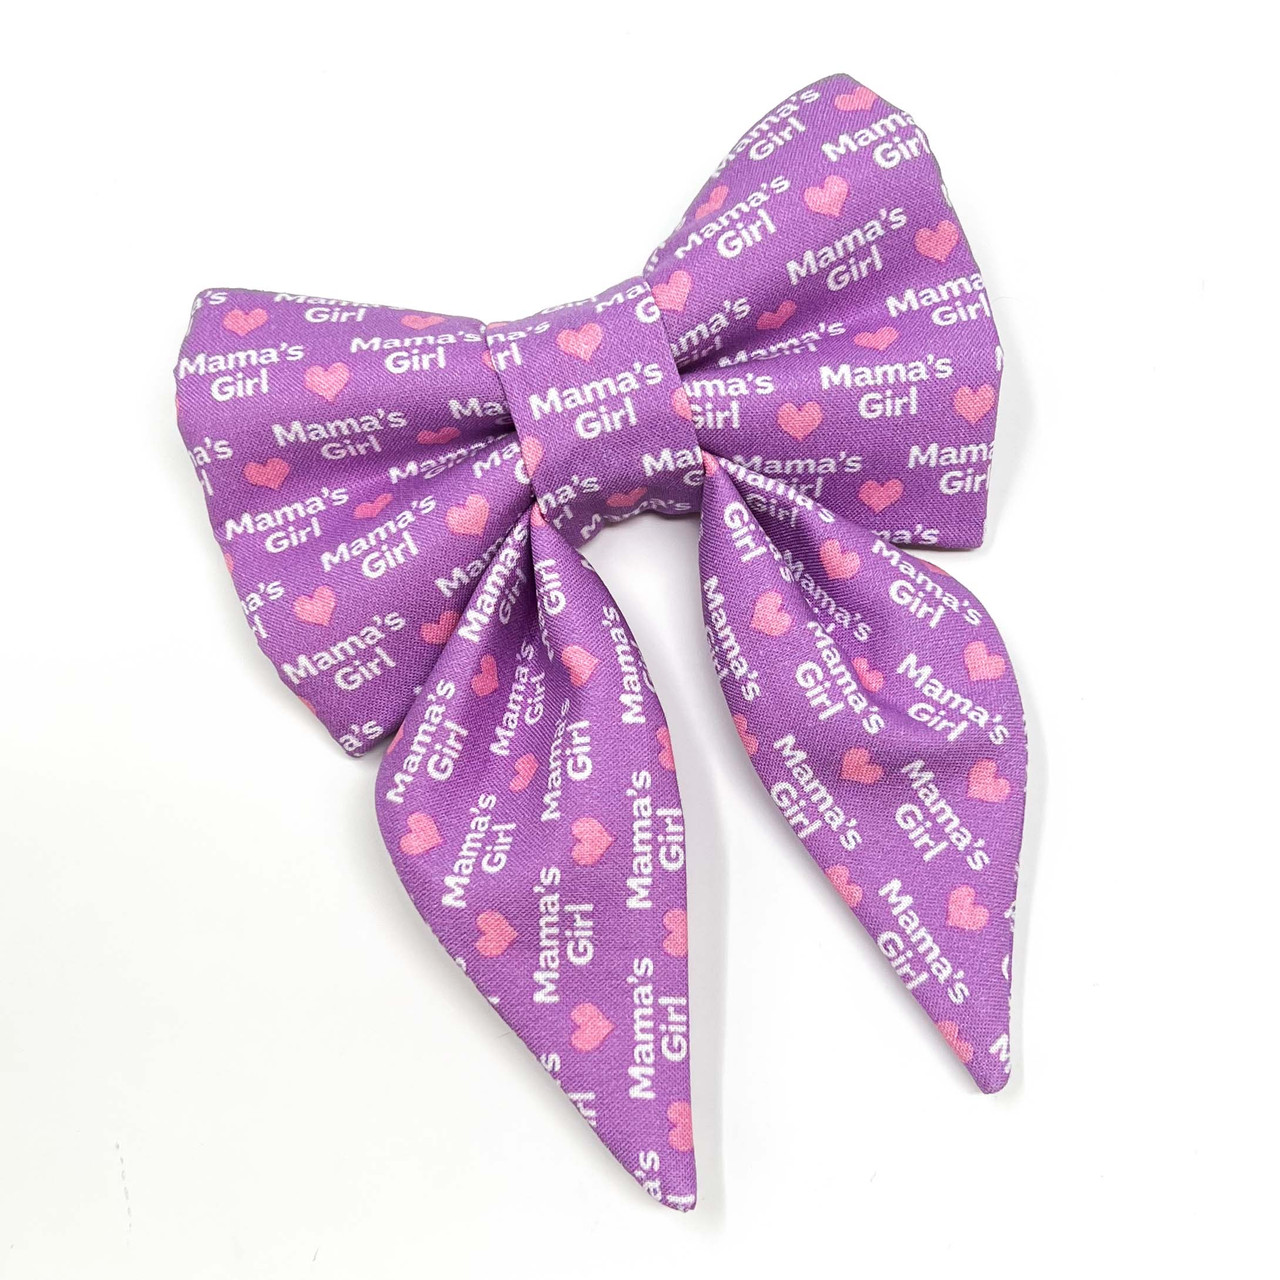 Mama’s Girl - Large Dog Sailor Bow Tie